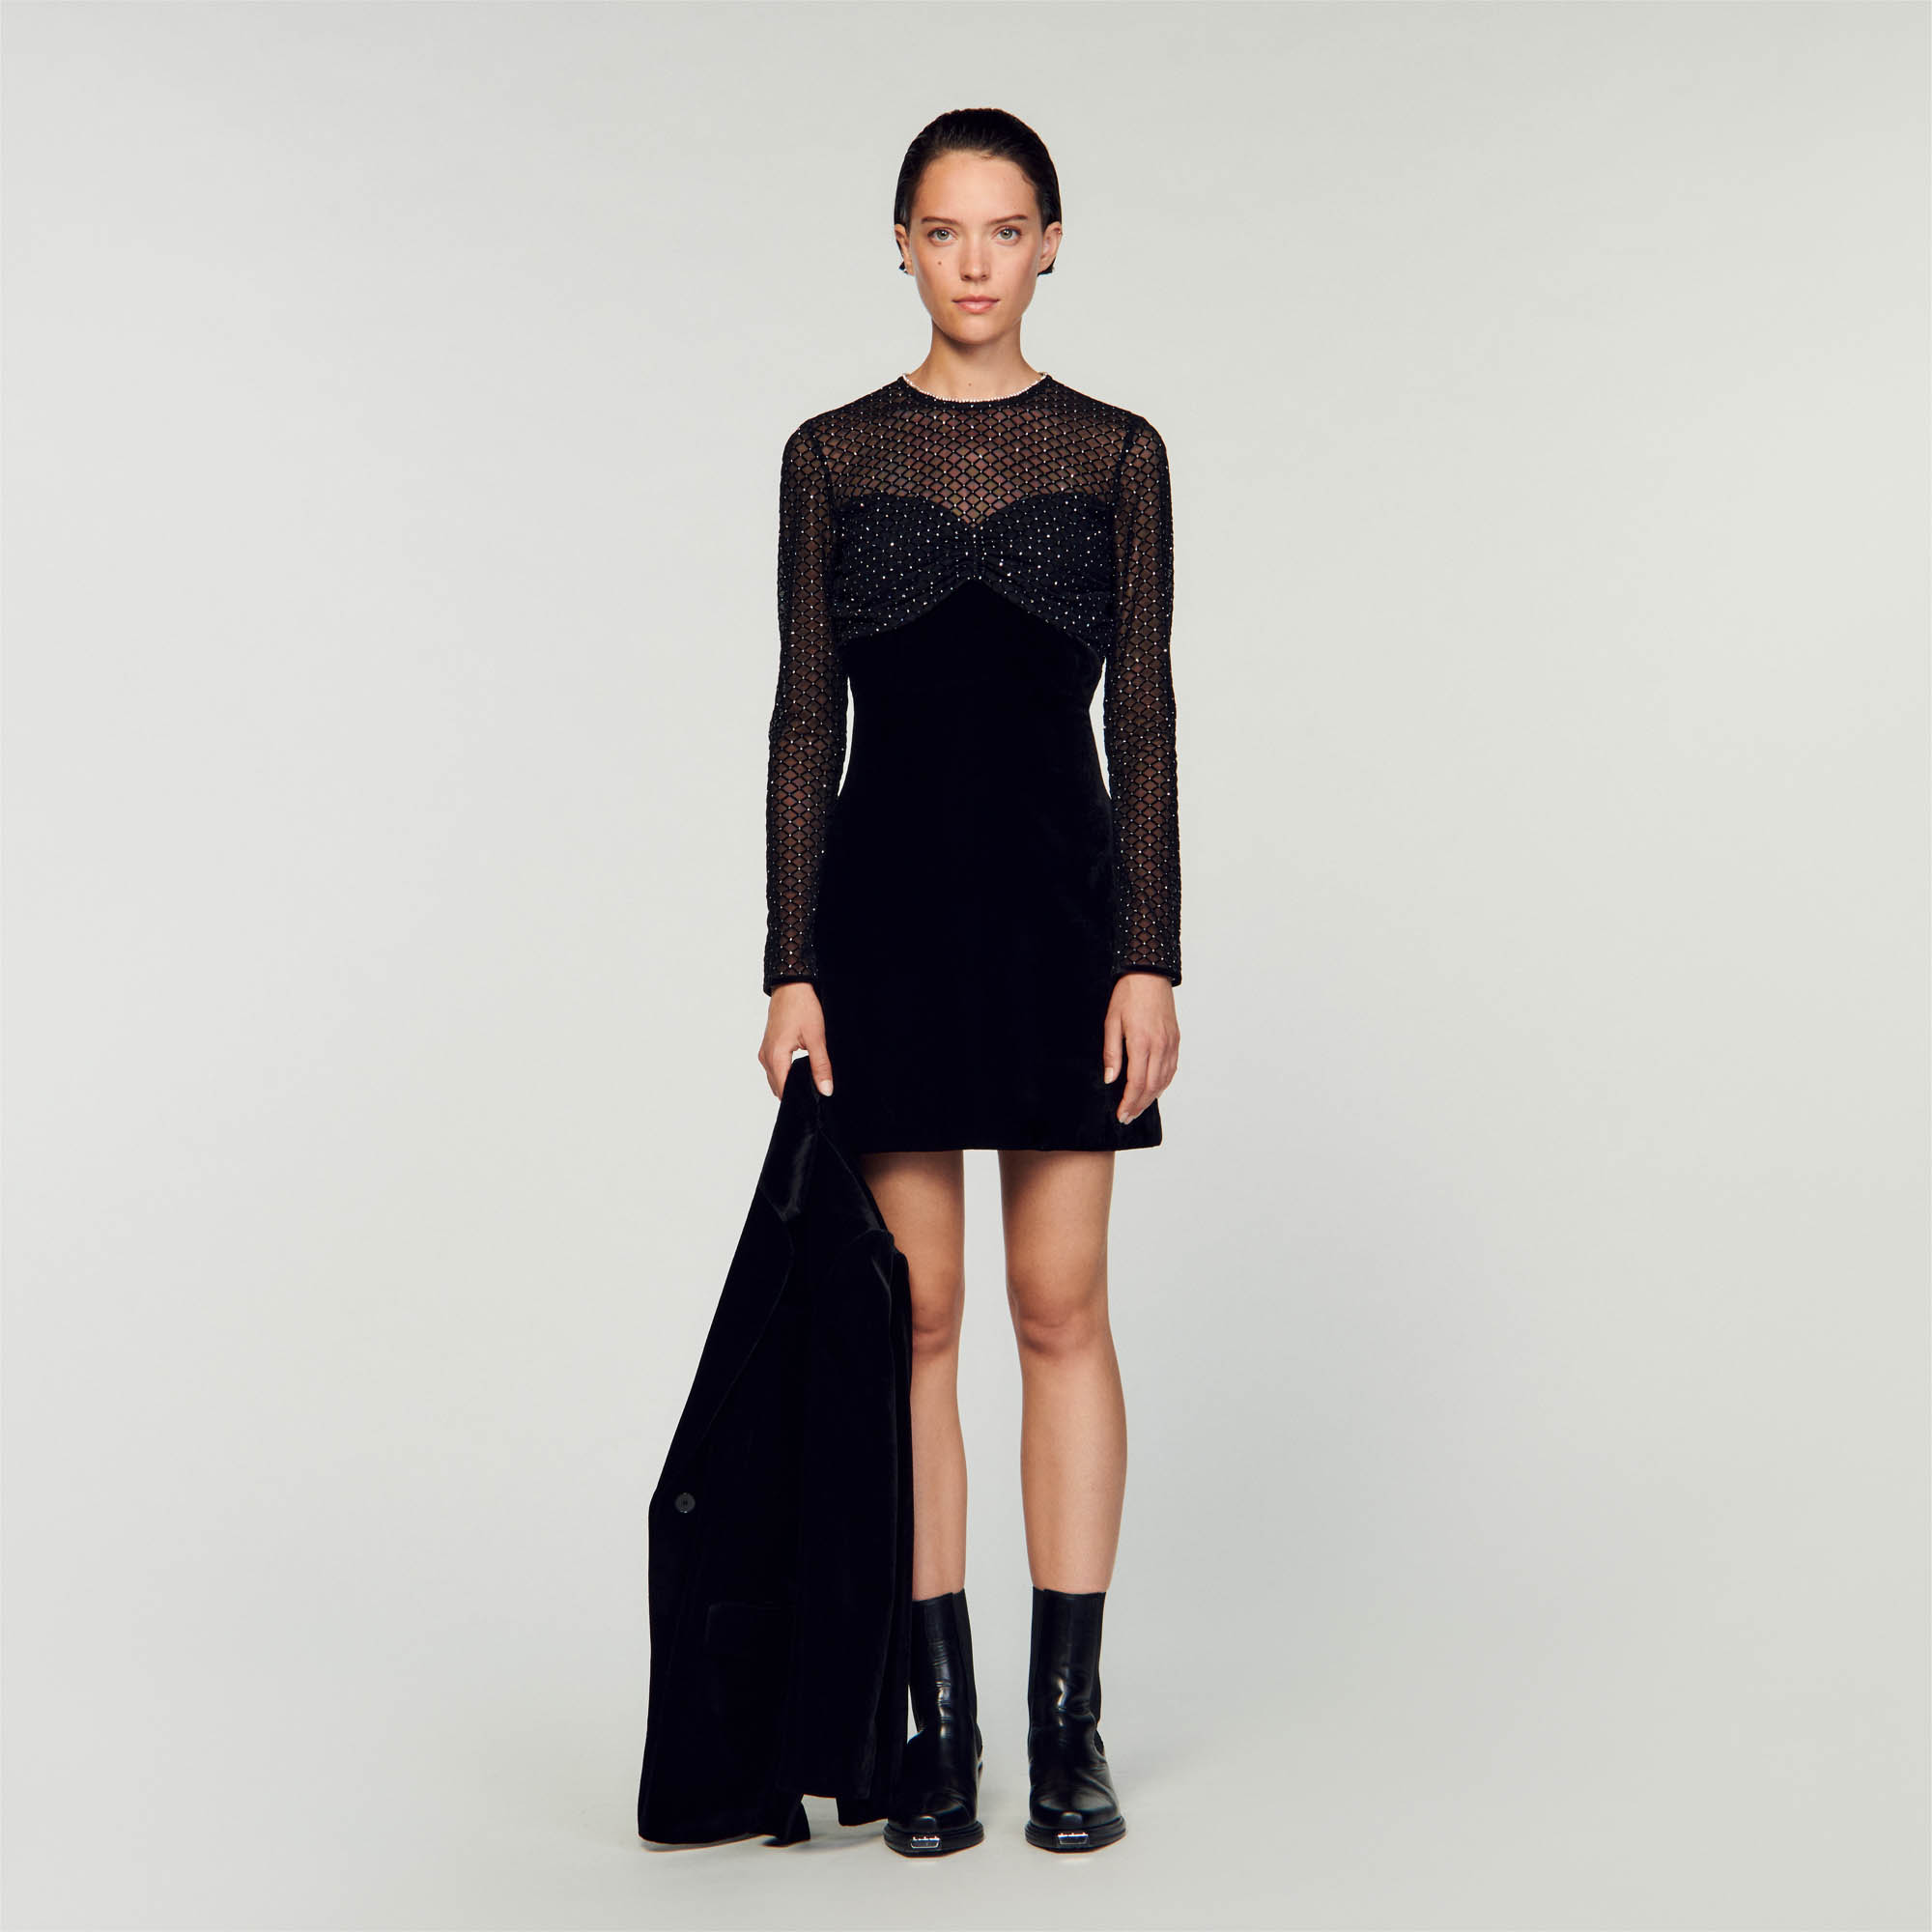 Sandro viscose Dual-material short dress in plain velvet and tulle covered in rhinestones, with a round neck embellished with rhinestones, long sleeves and a gathered panel under the bust